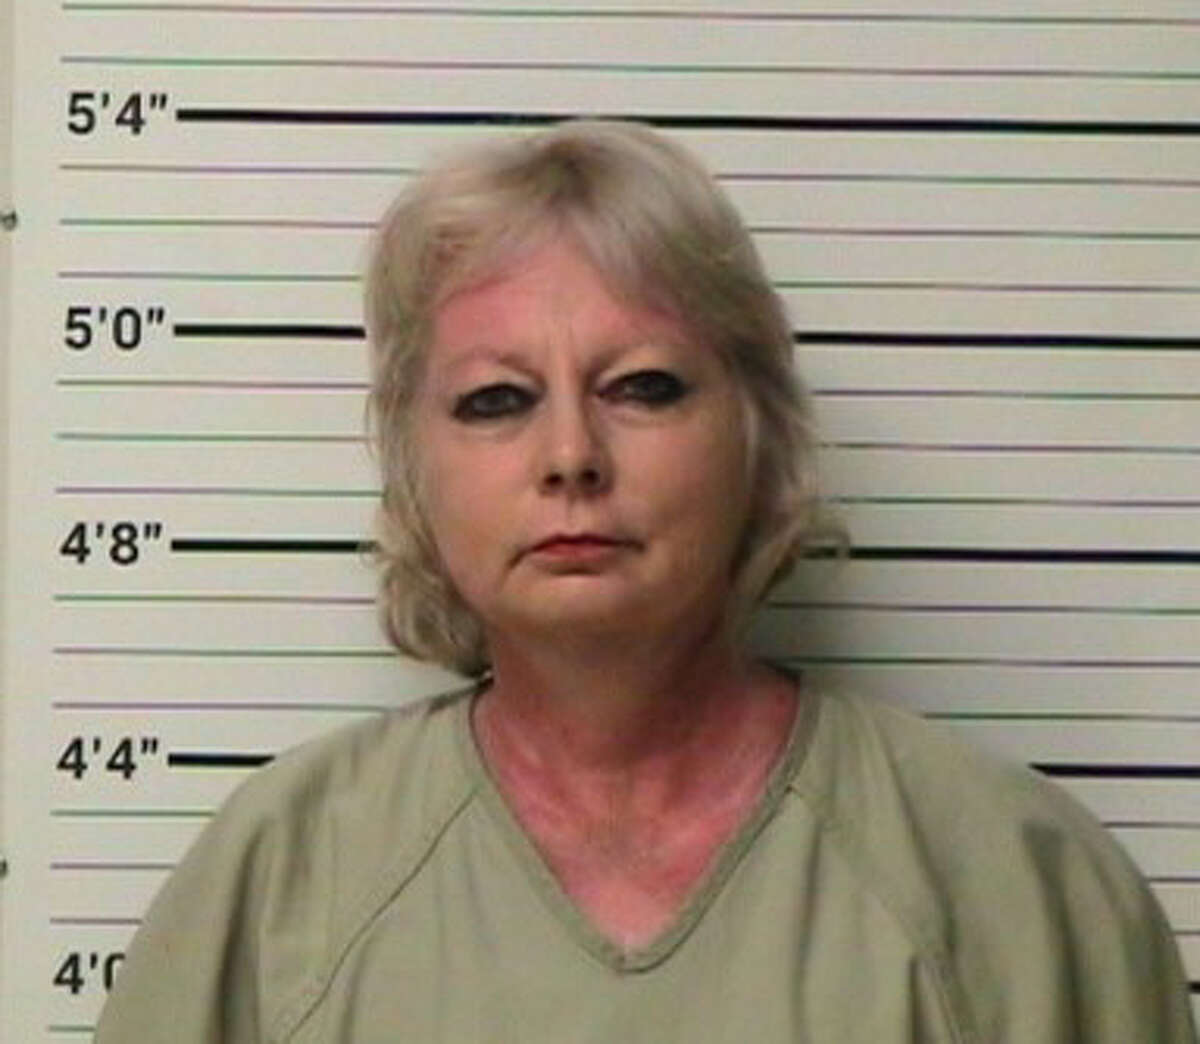 Kerr County District Clerk Robbin Burlew was arrested the weekend of March 31-April 1, 2018, and is facing charges of DWI/open container.